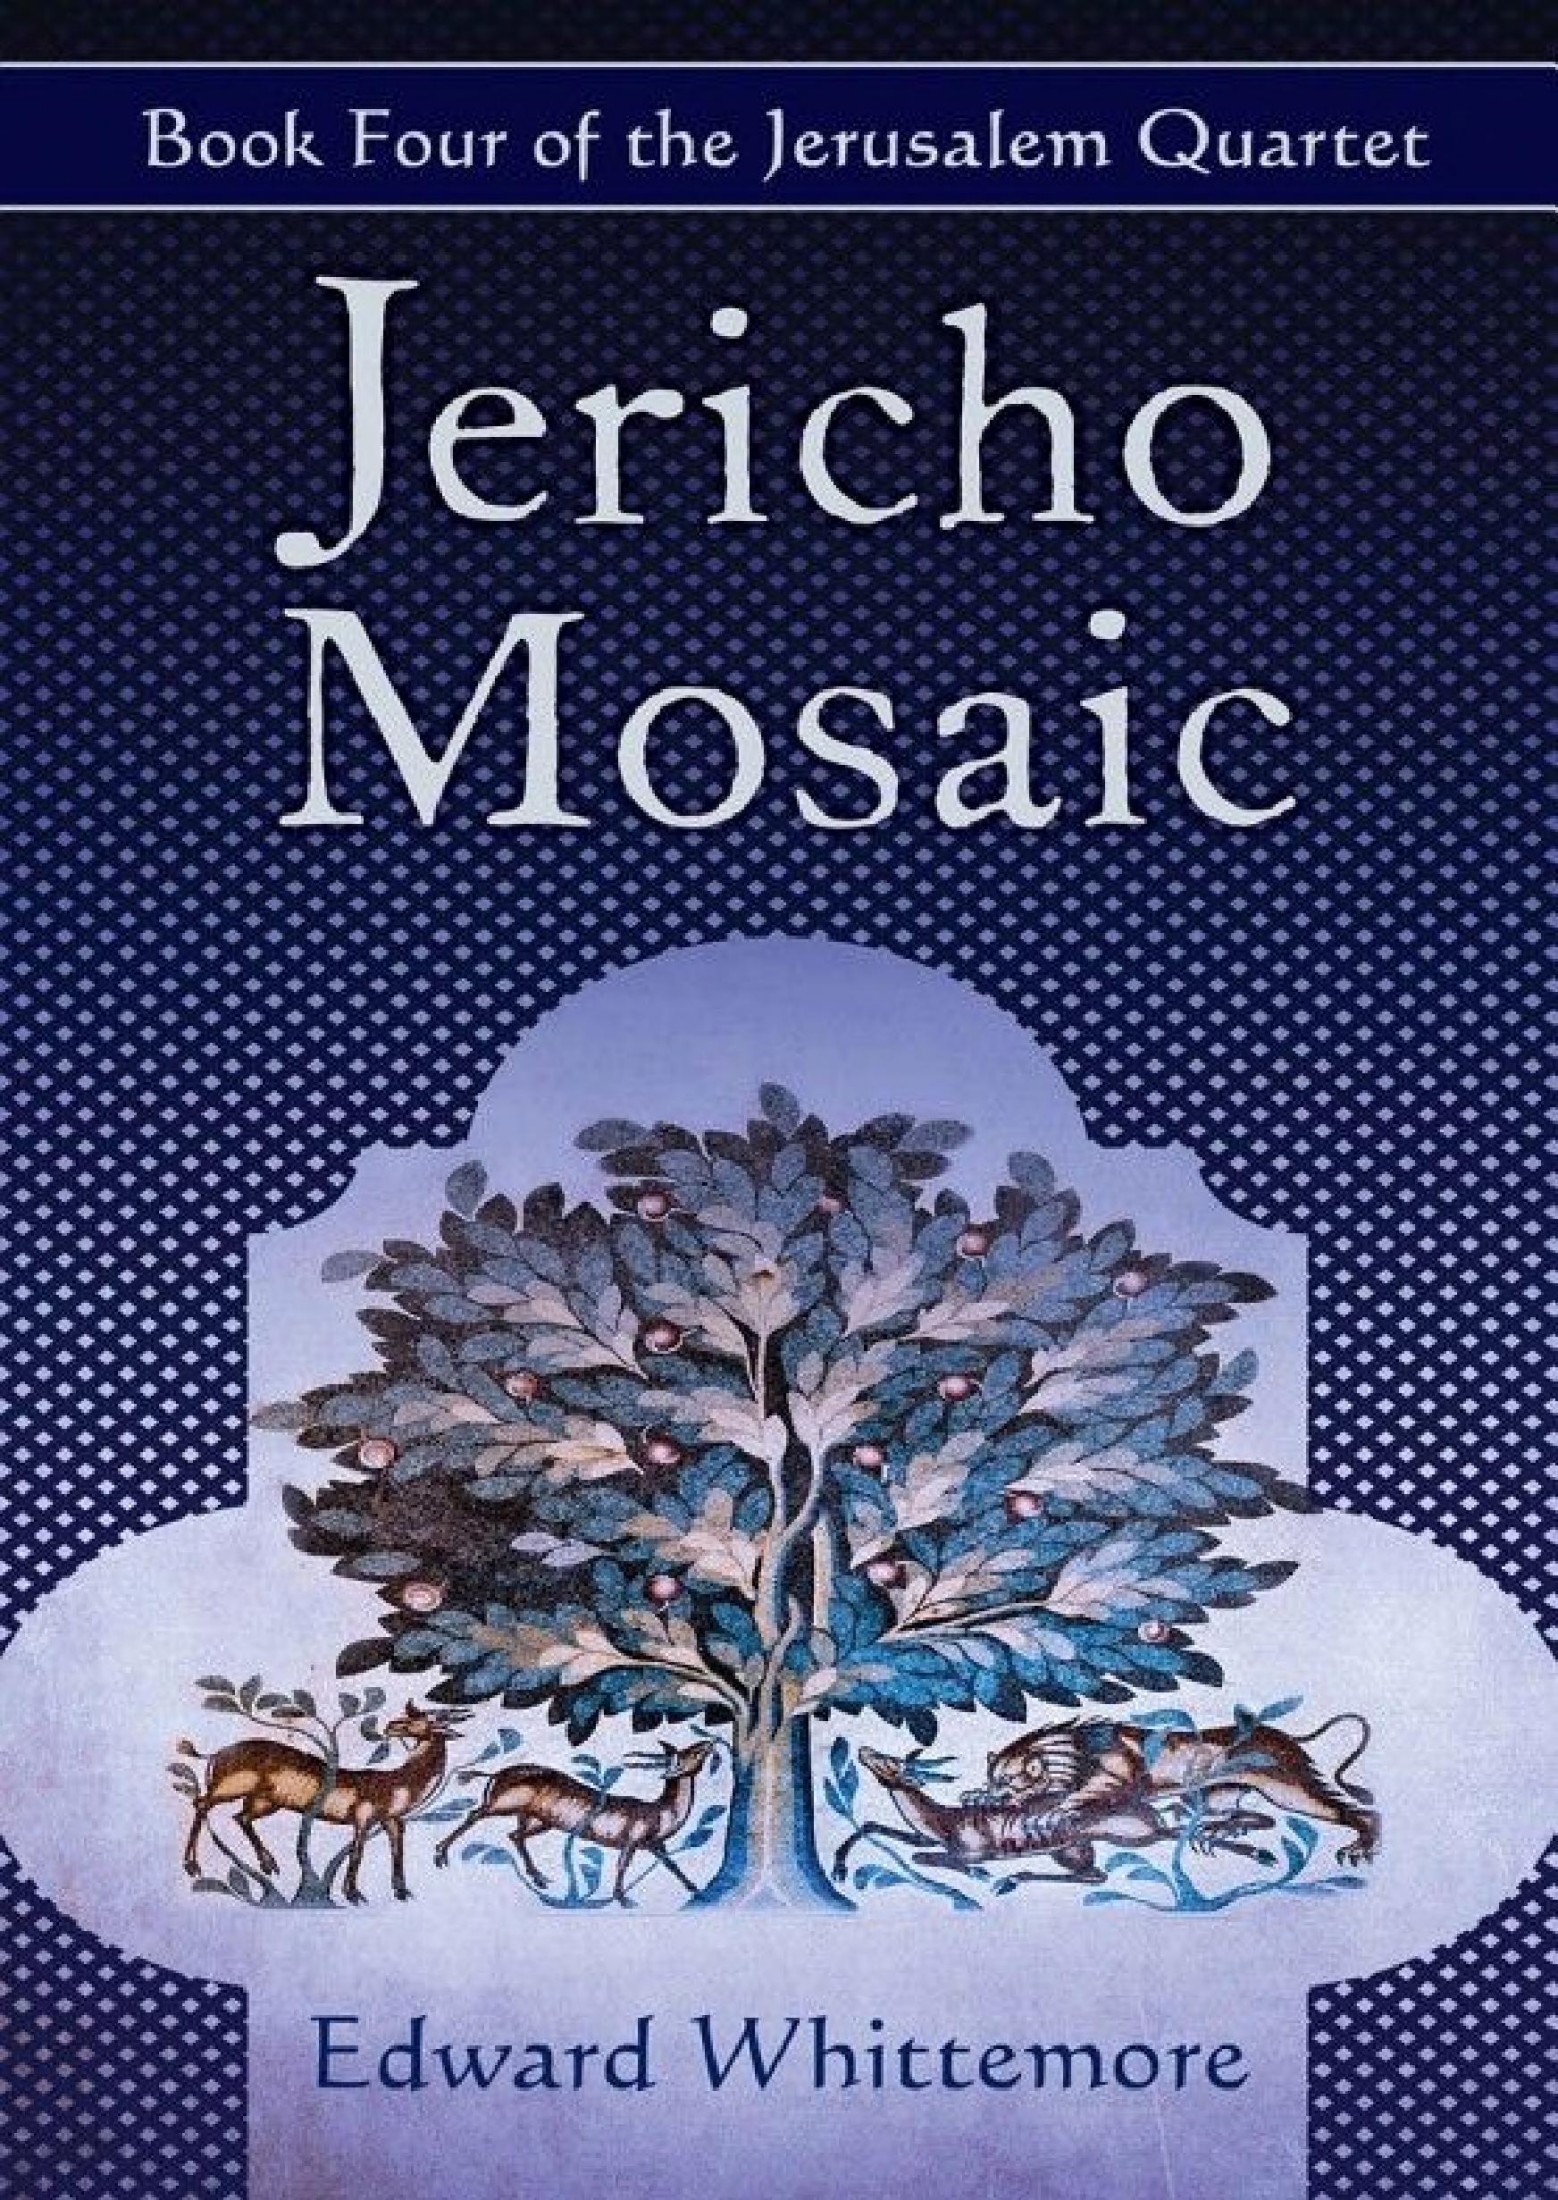 Edward Whittemore: Jericho Mosaic (2013, Open Road Integrated Media, Inc.)